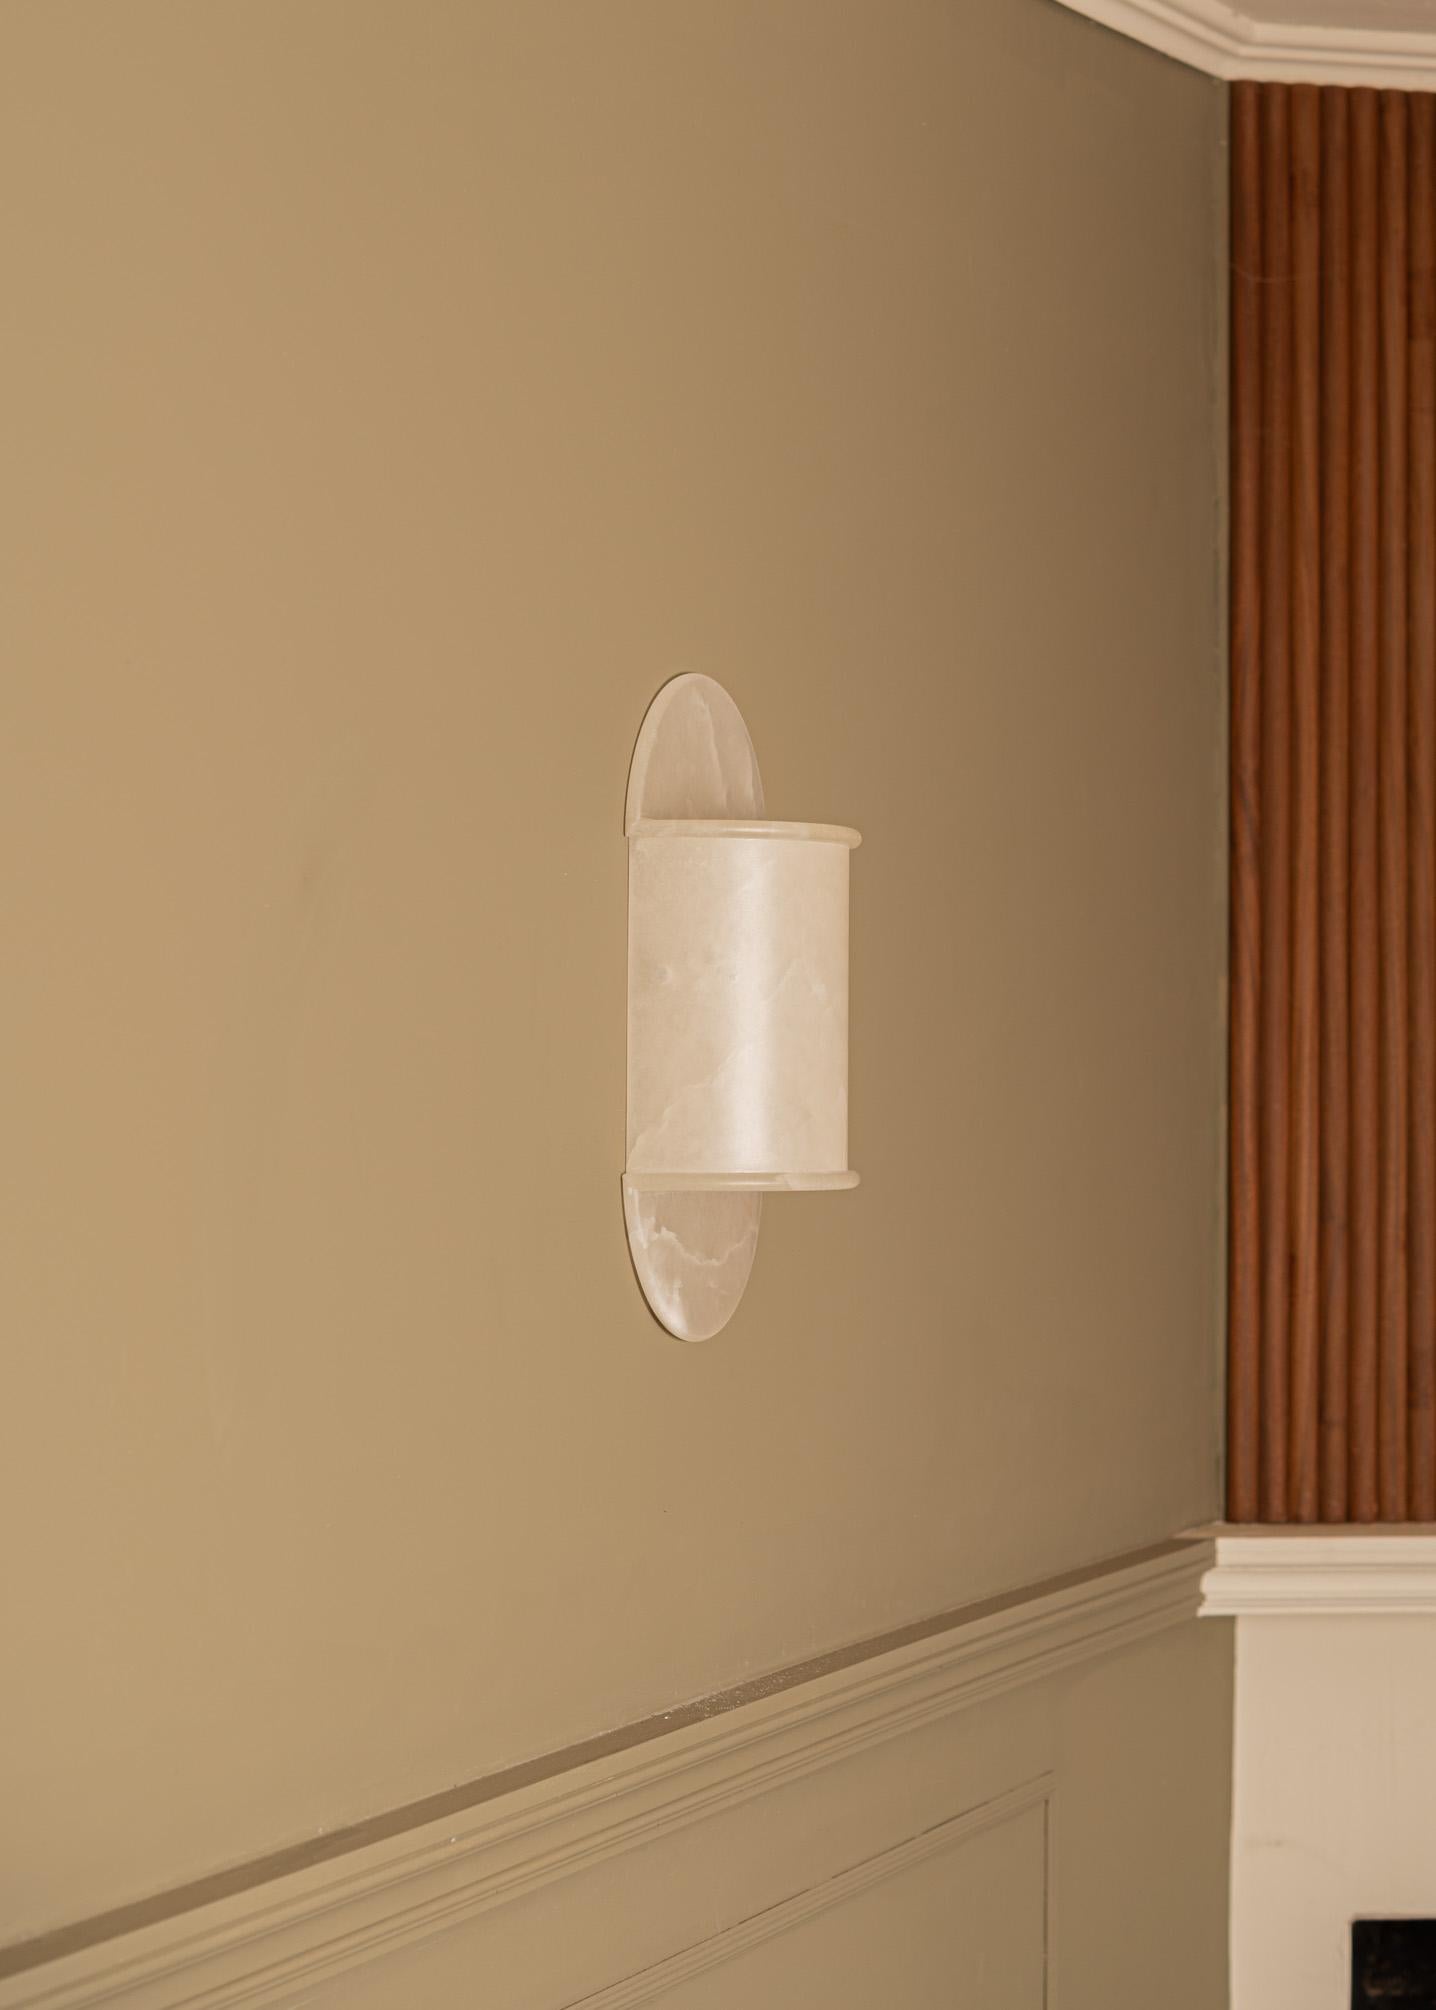 Pilolo White Alabaster Wall Sconce by Simone & Marcel
Dimensions: D 11 x W 22 x H 42 cm.
Materials: White alabaster.

Available in different brass and alabaster options and finishes. Custom options available on request. Please contact us. 

All our